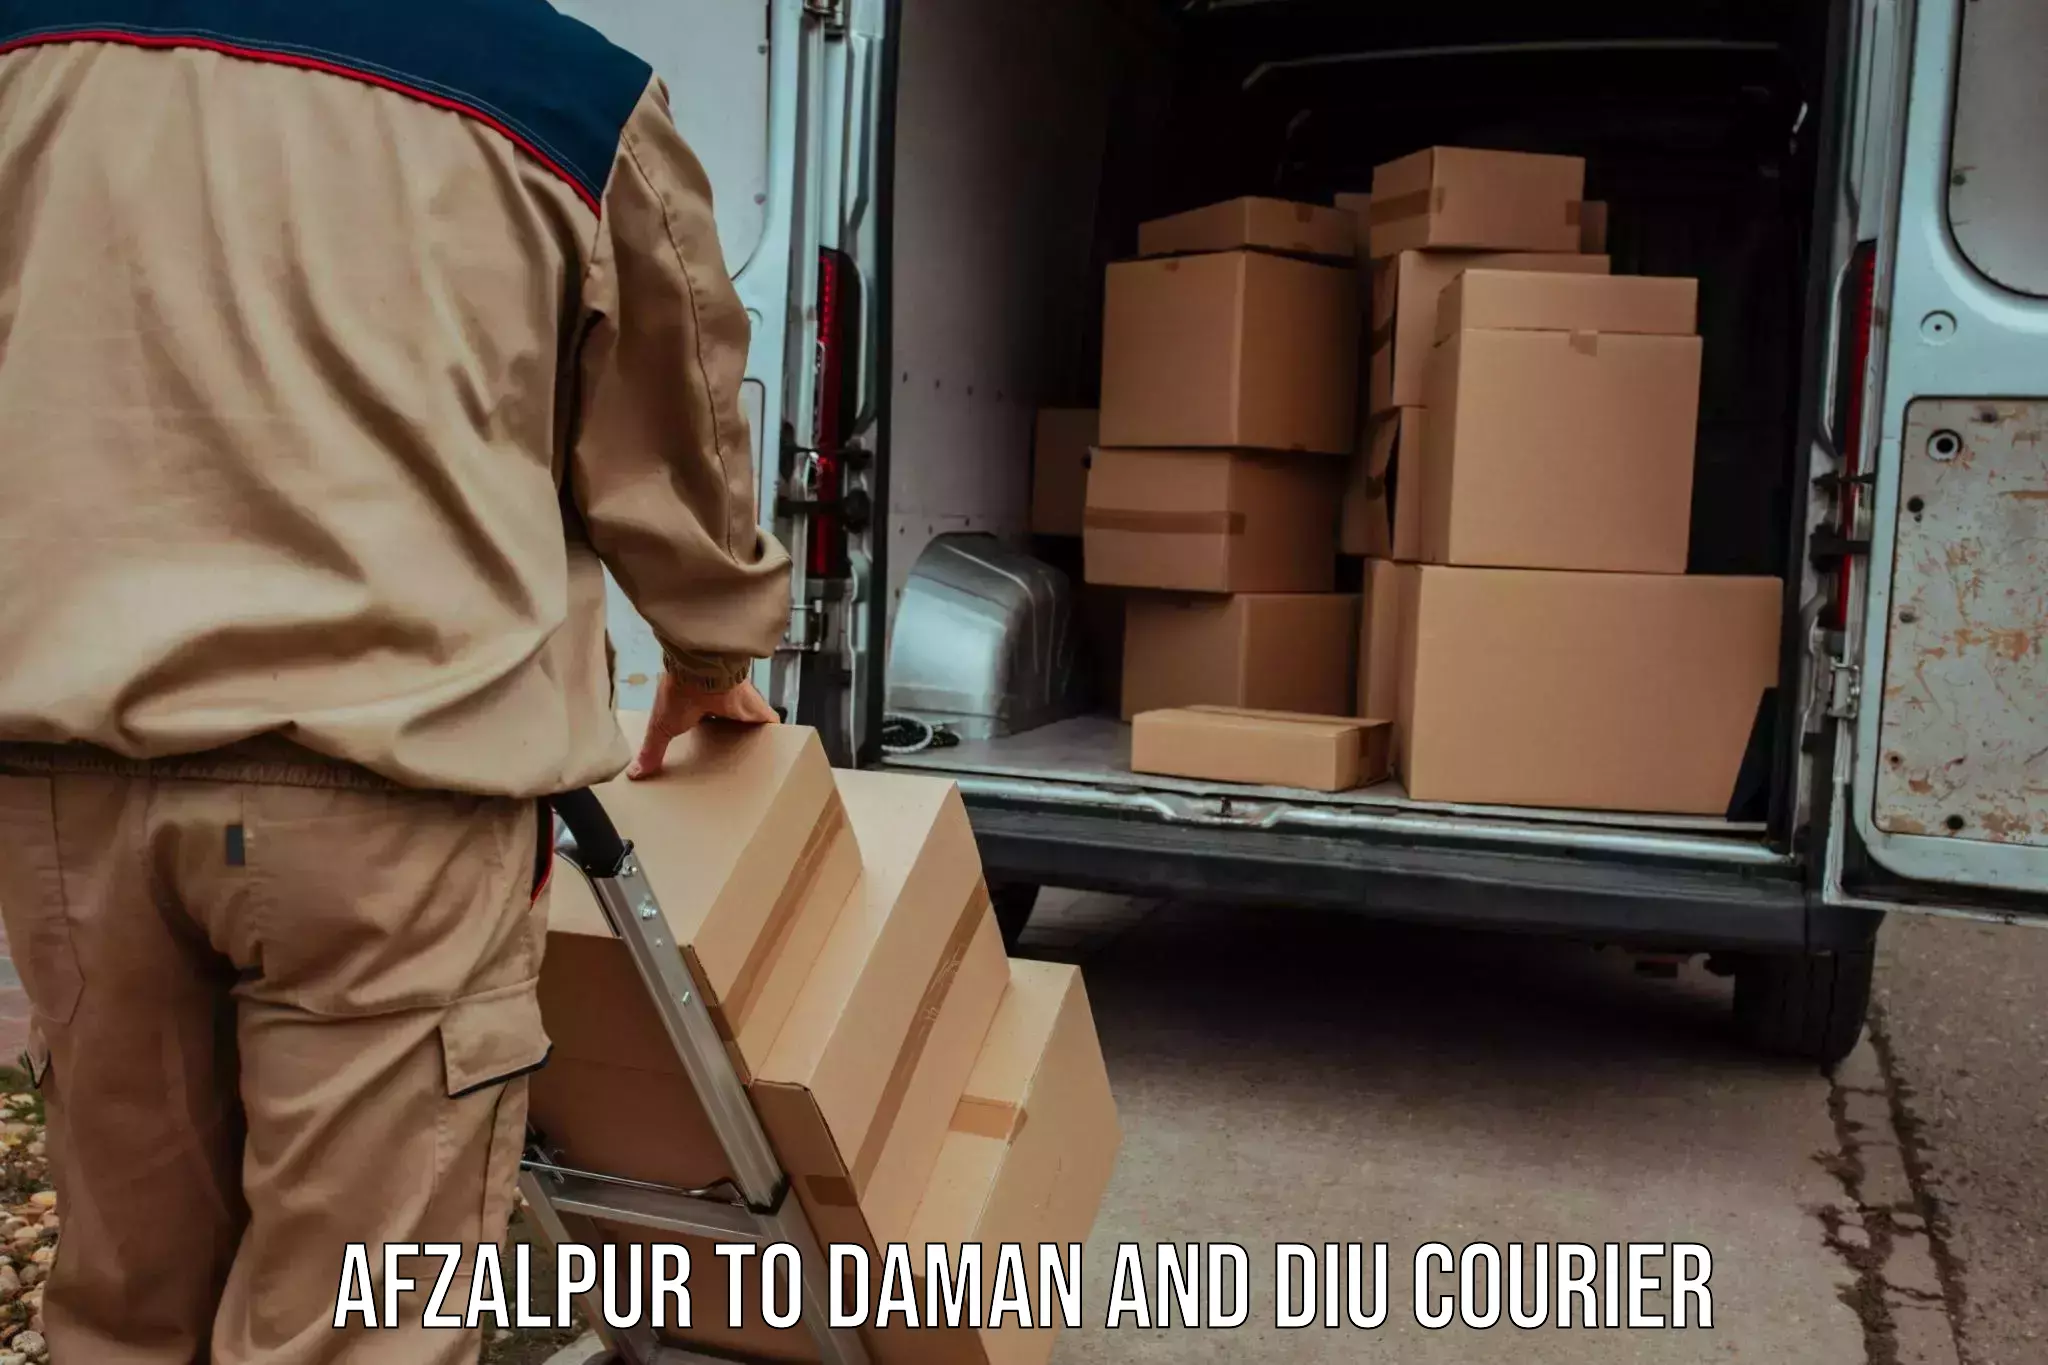 Next day courier Afzalpur to Daman and Diu